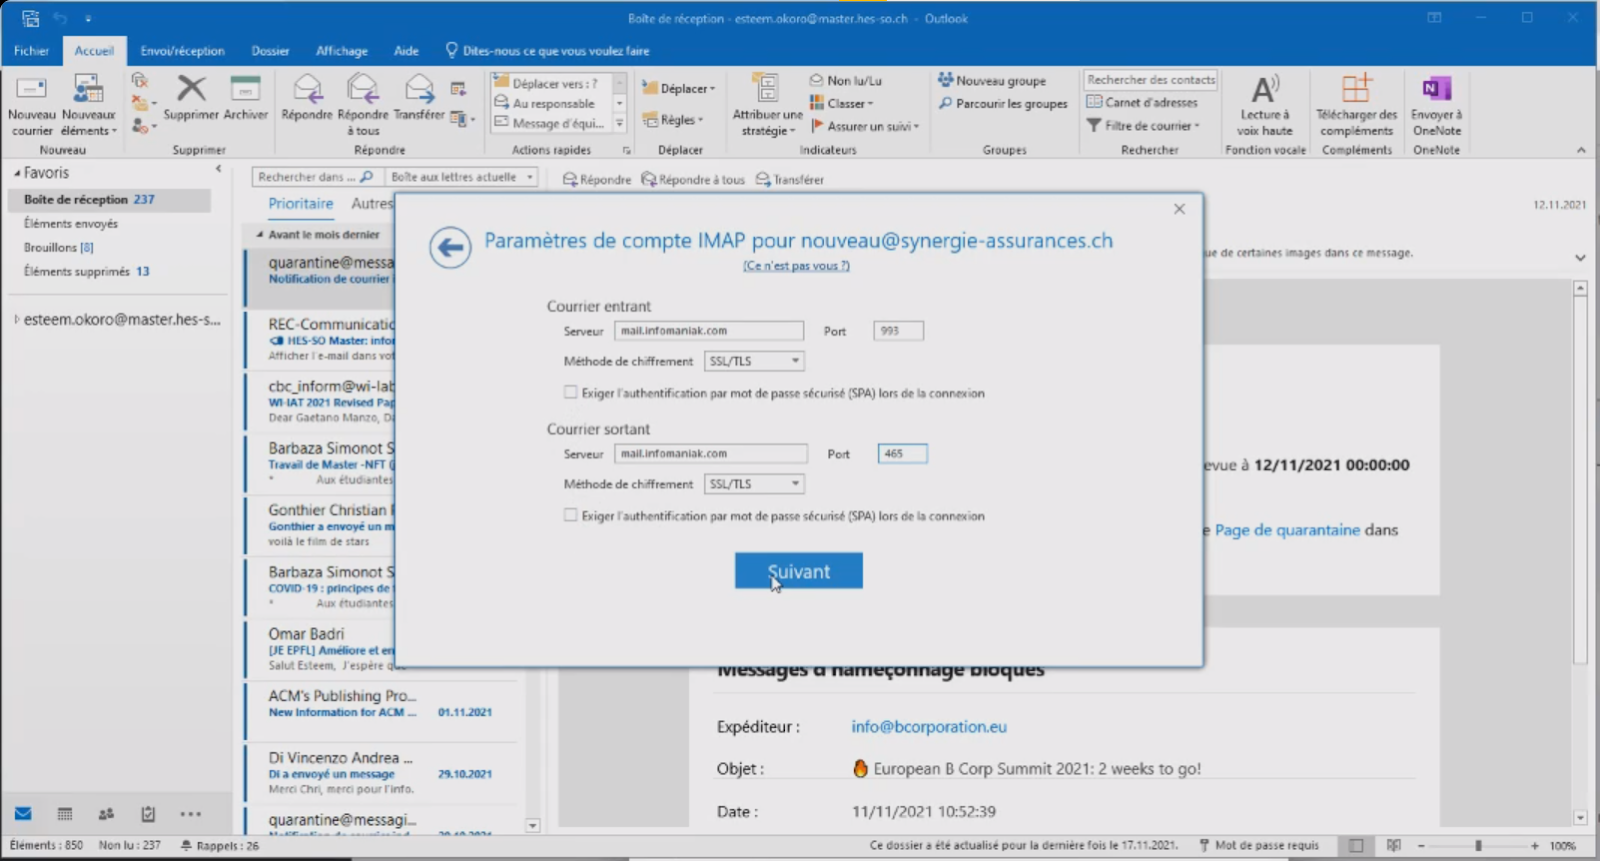 How to add an email account to Microsoft Outlook on Windows - image GeekWorkers - 8